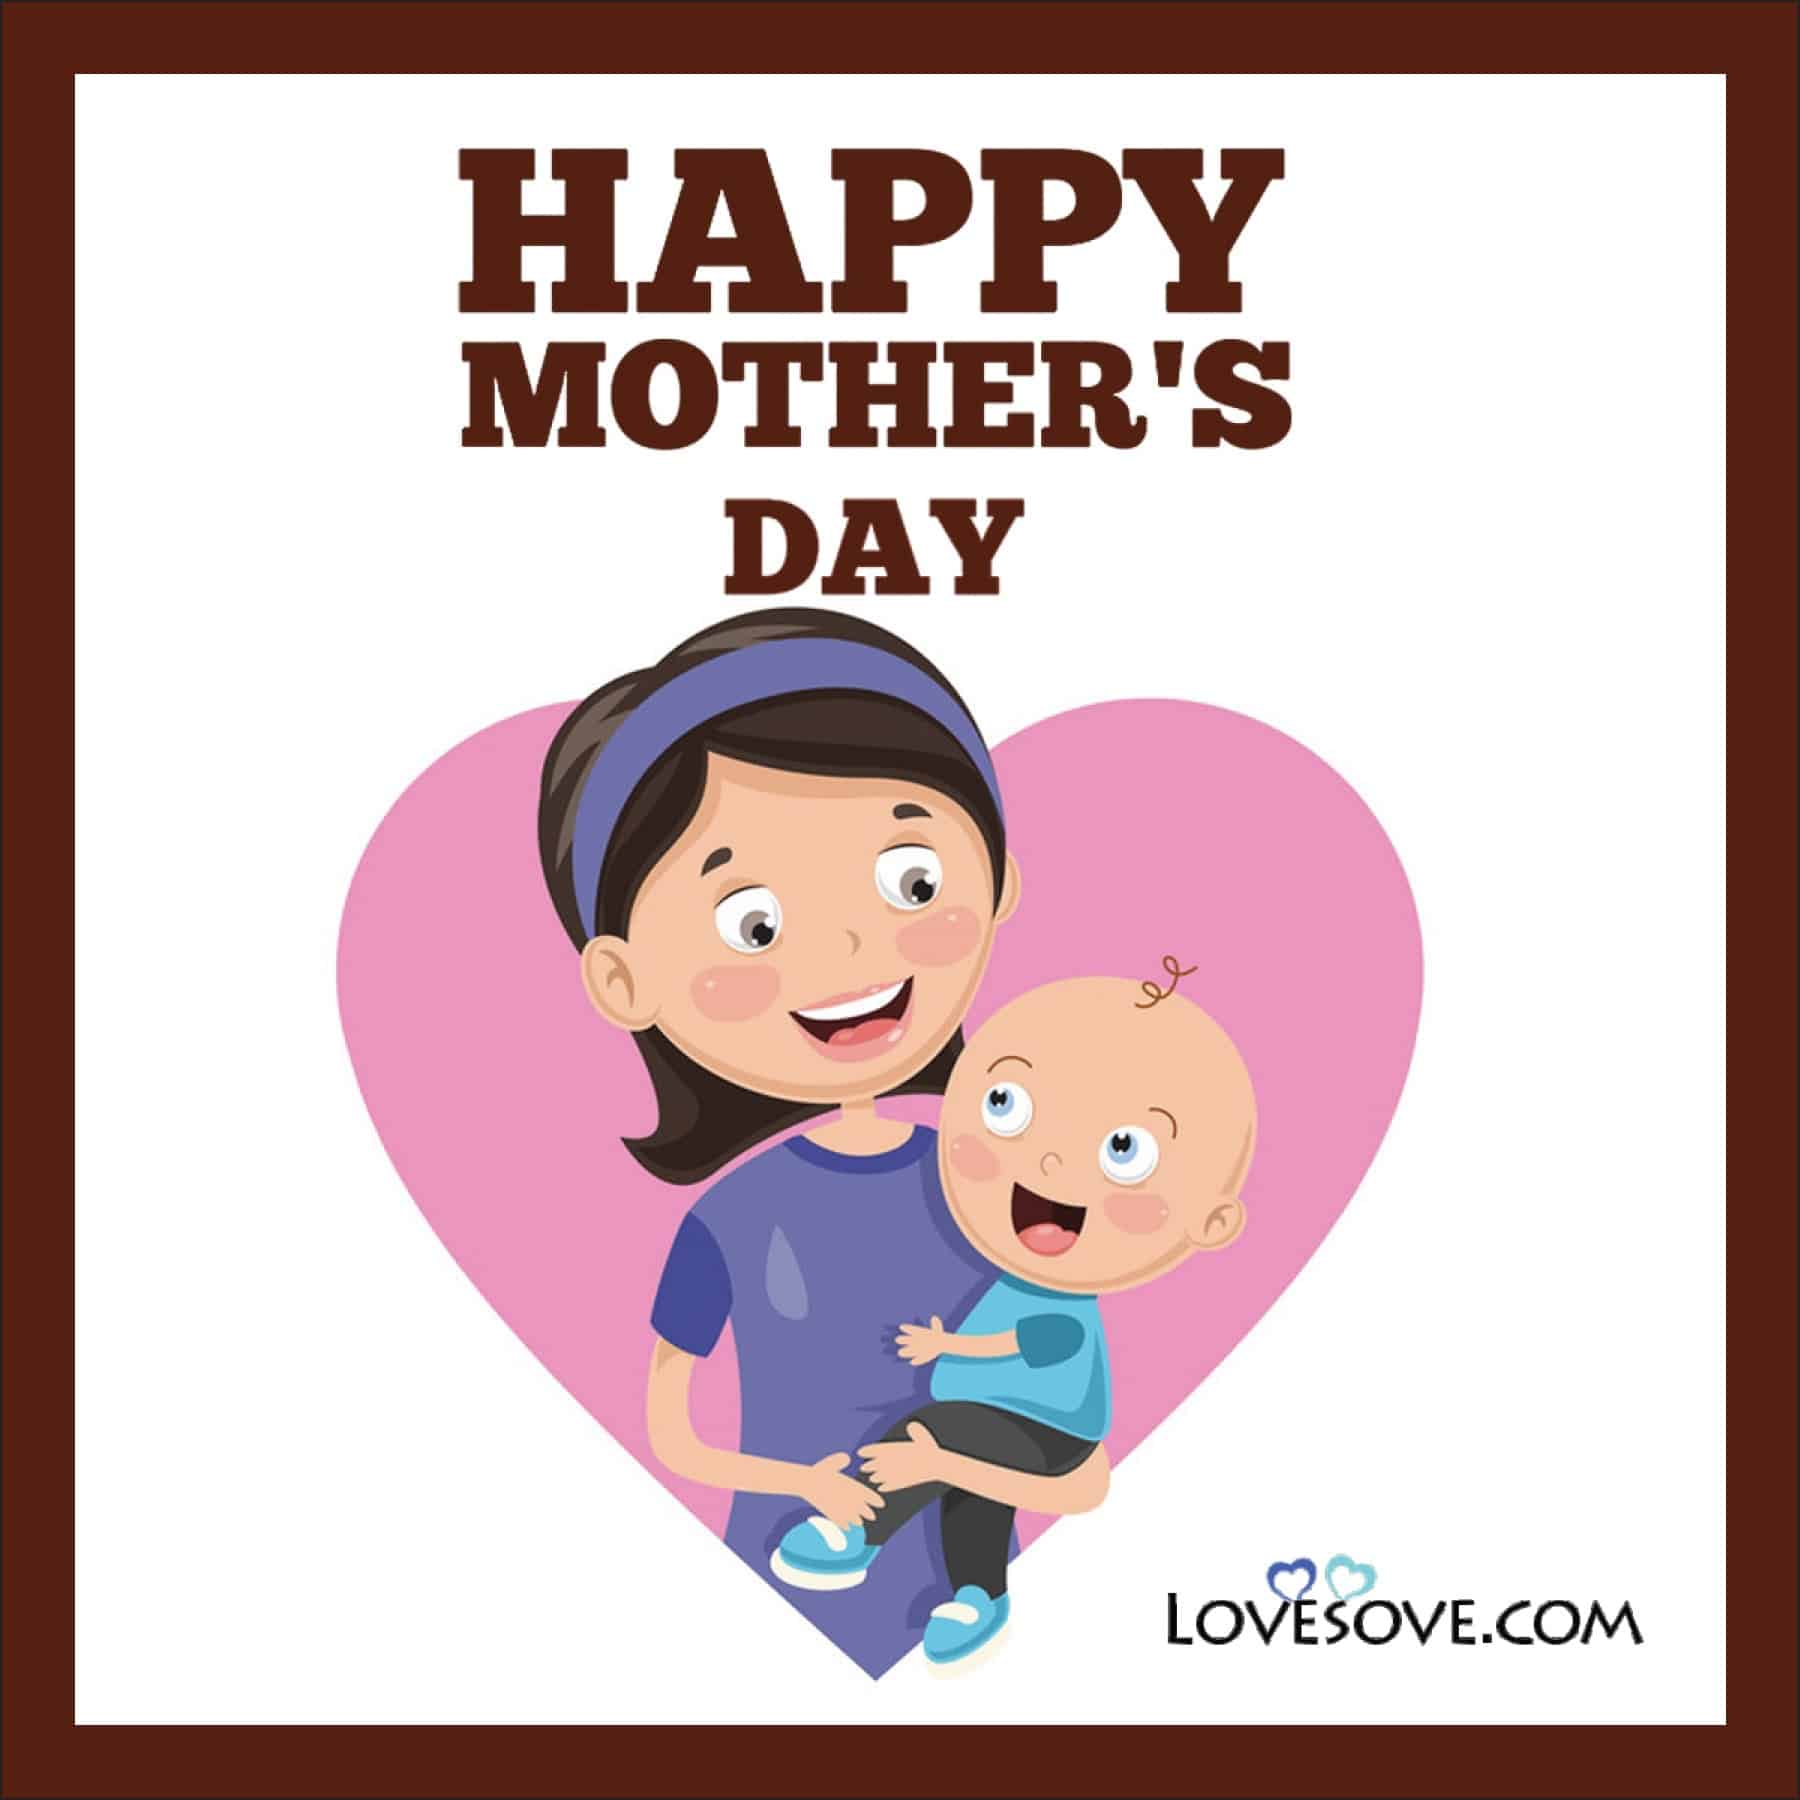 mother’s-day-cards-Lovesove, , mothers day cards lovesove